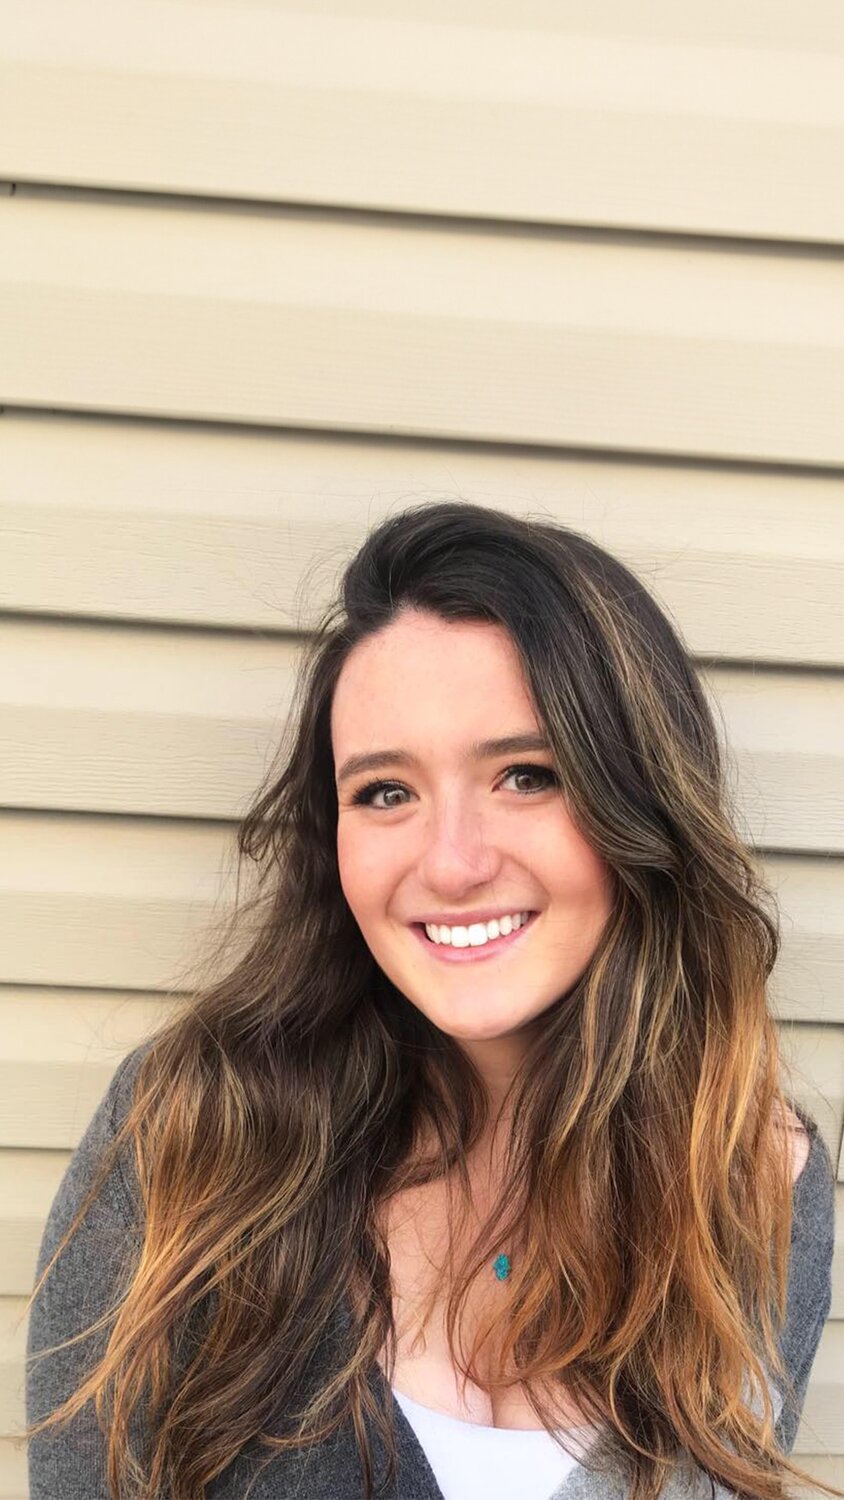 A teacher at the Franklin Early Childhood Center, Jordyn Landau’s impact was felt in her community, in the classroom and in a portion of South Africa. She was 24.